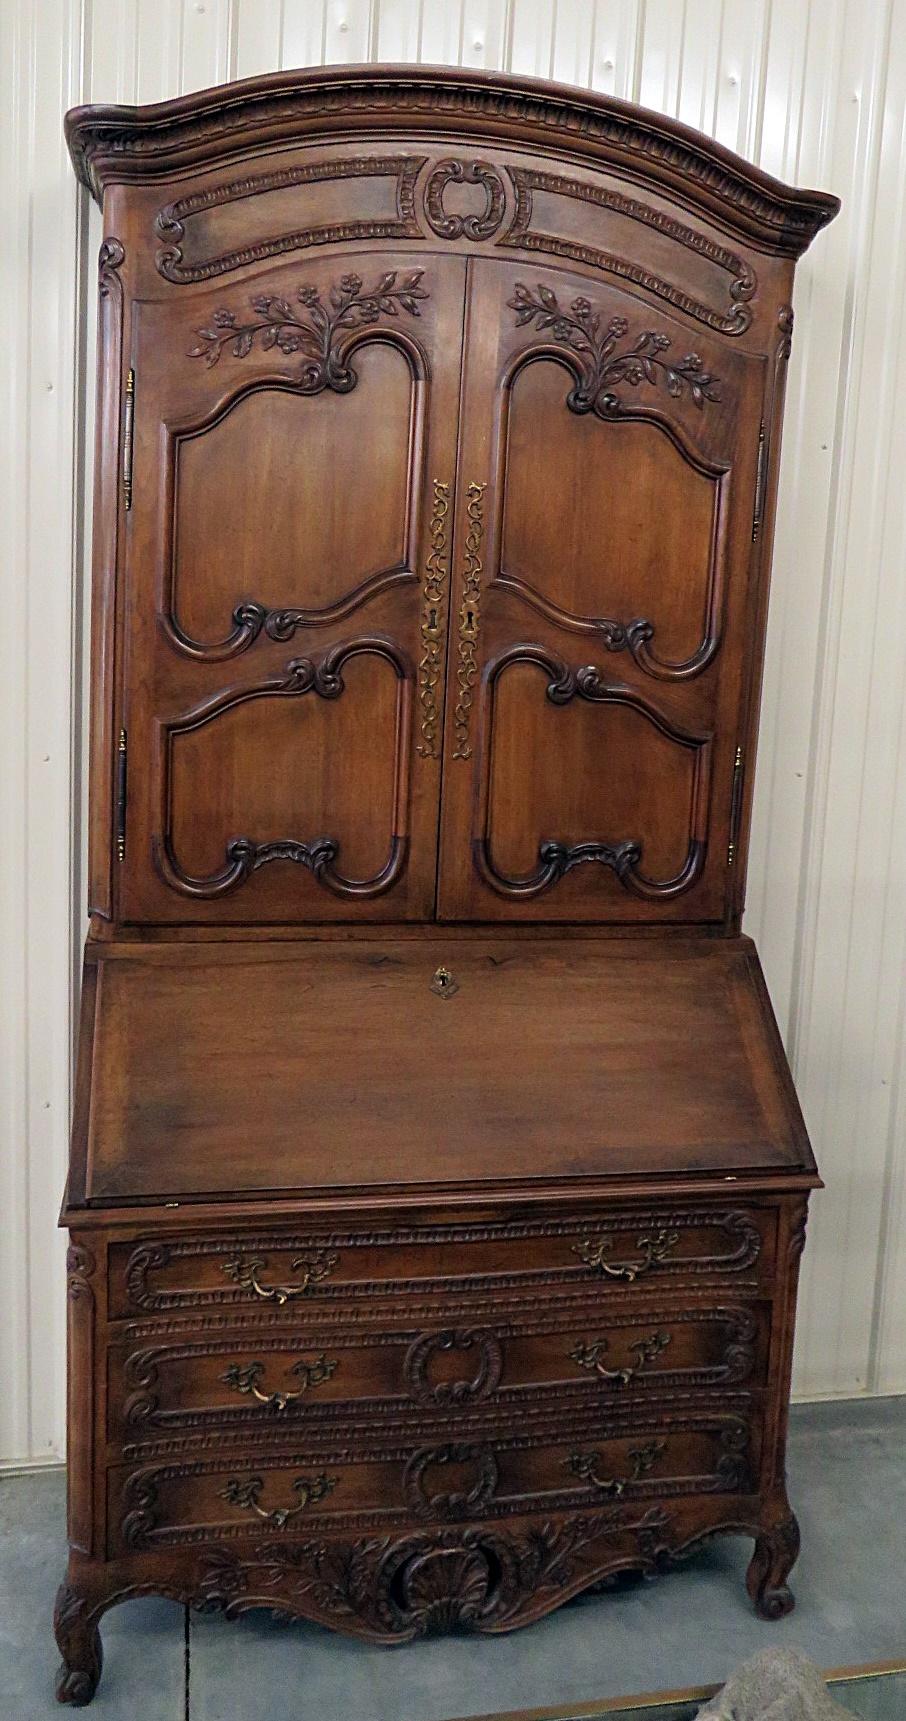 Don Rousseau country French secretary desk with 3 shelves behind 2 doors, leather top writing surface that encloses 3 drawers, and 3 drawers at the bottom.